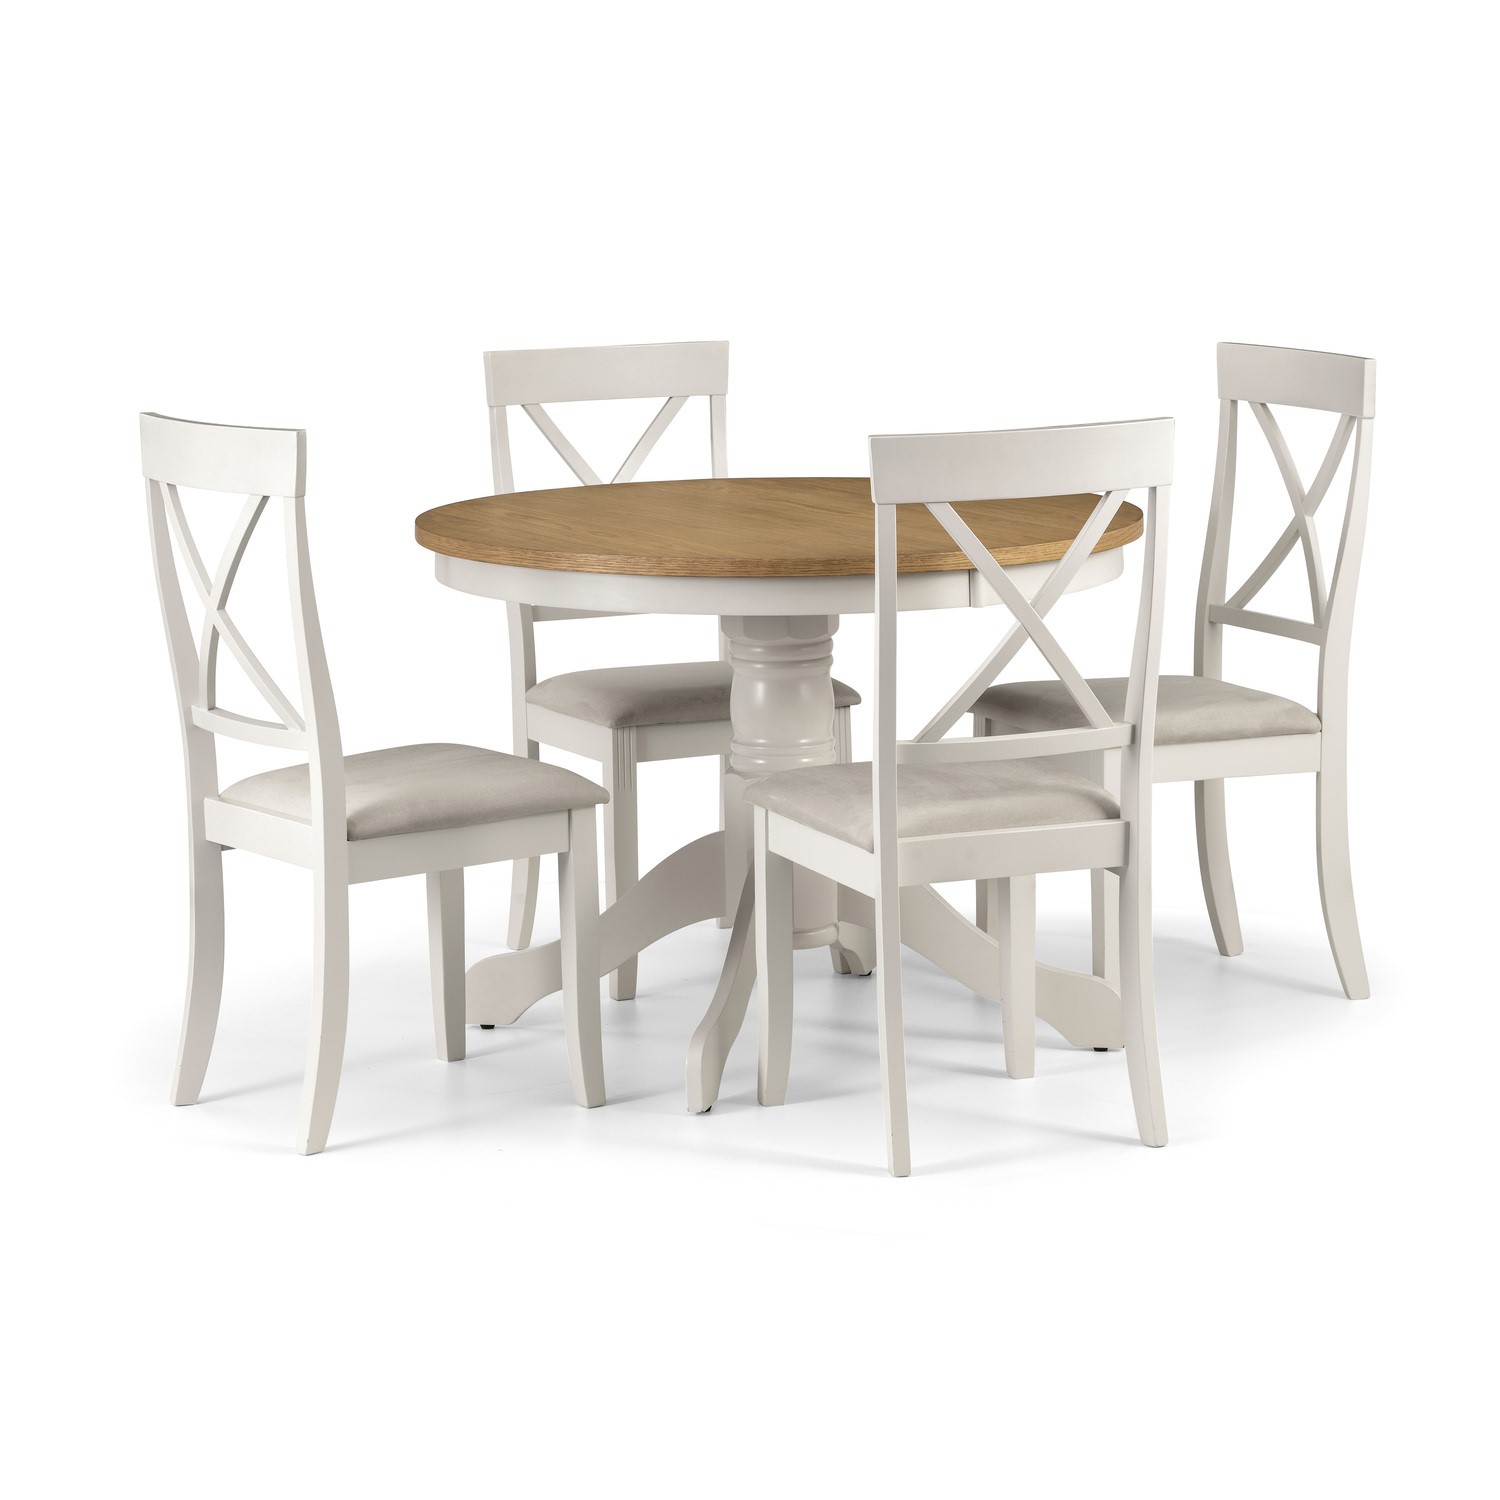 Read more about Round oak top dining table with ivory base davenport